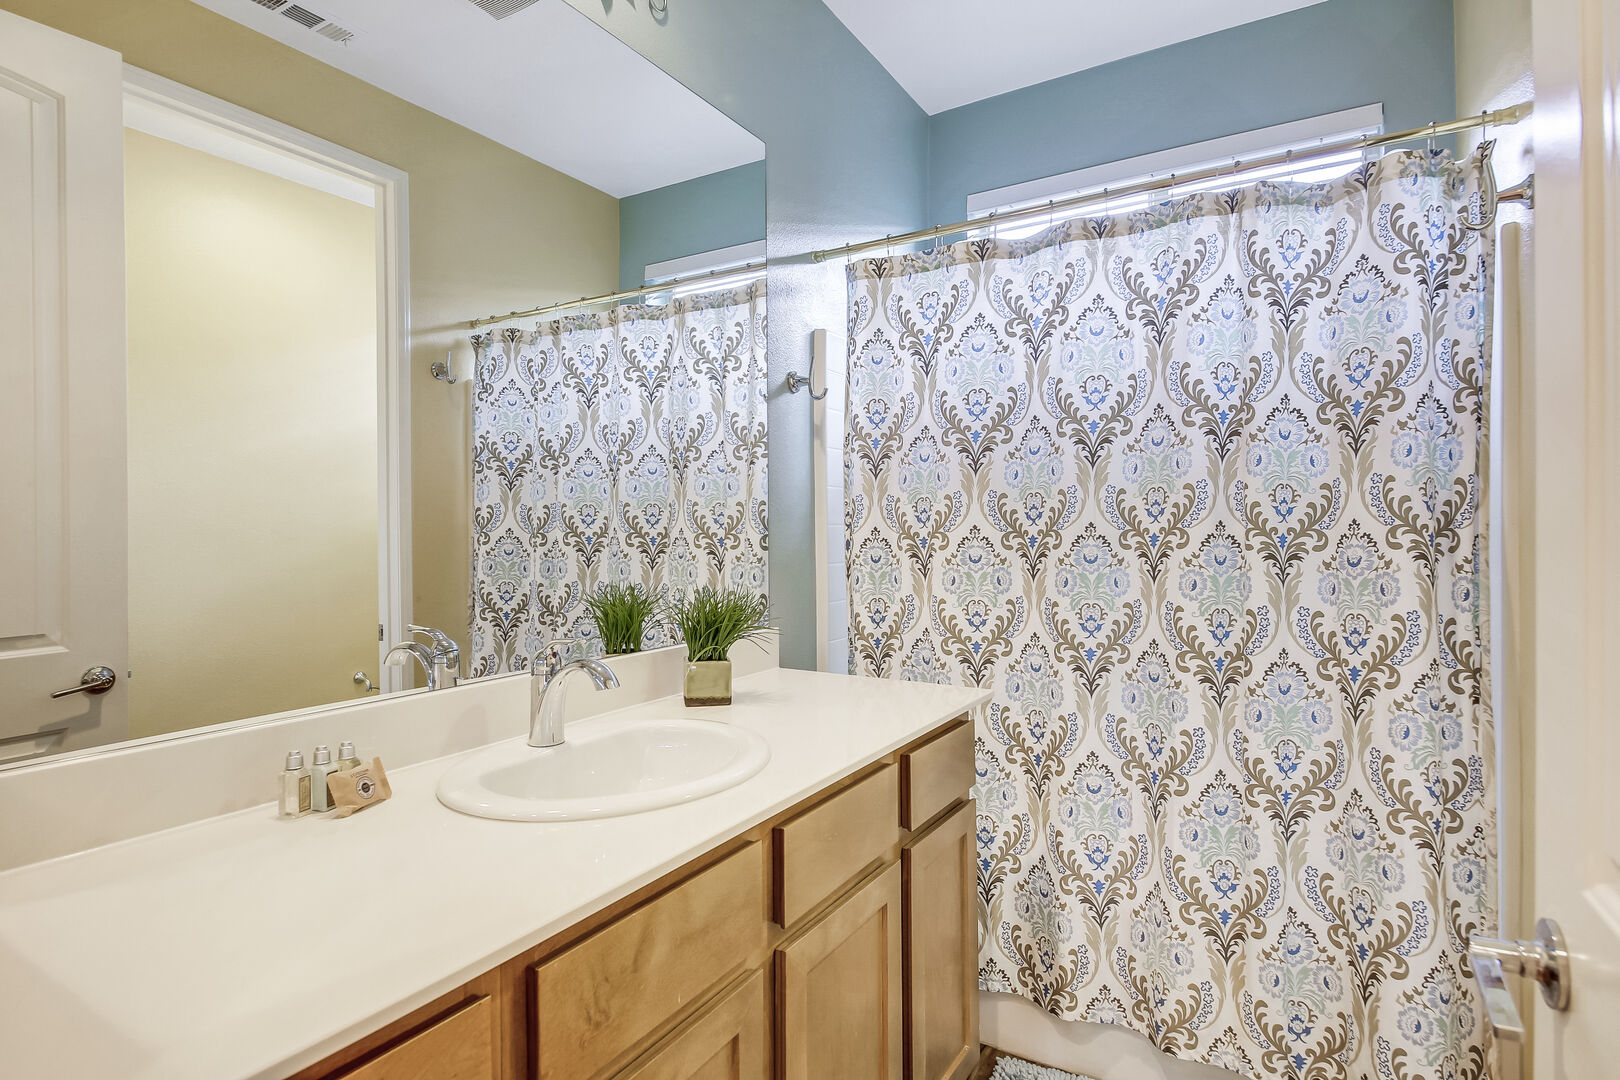 The hallway bathroom features a shower and tub combo and vanity sinks.